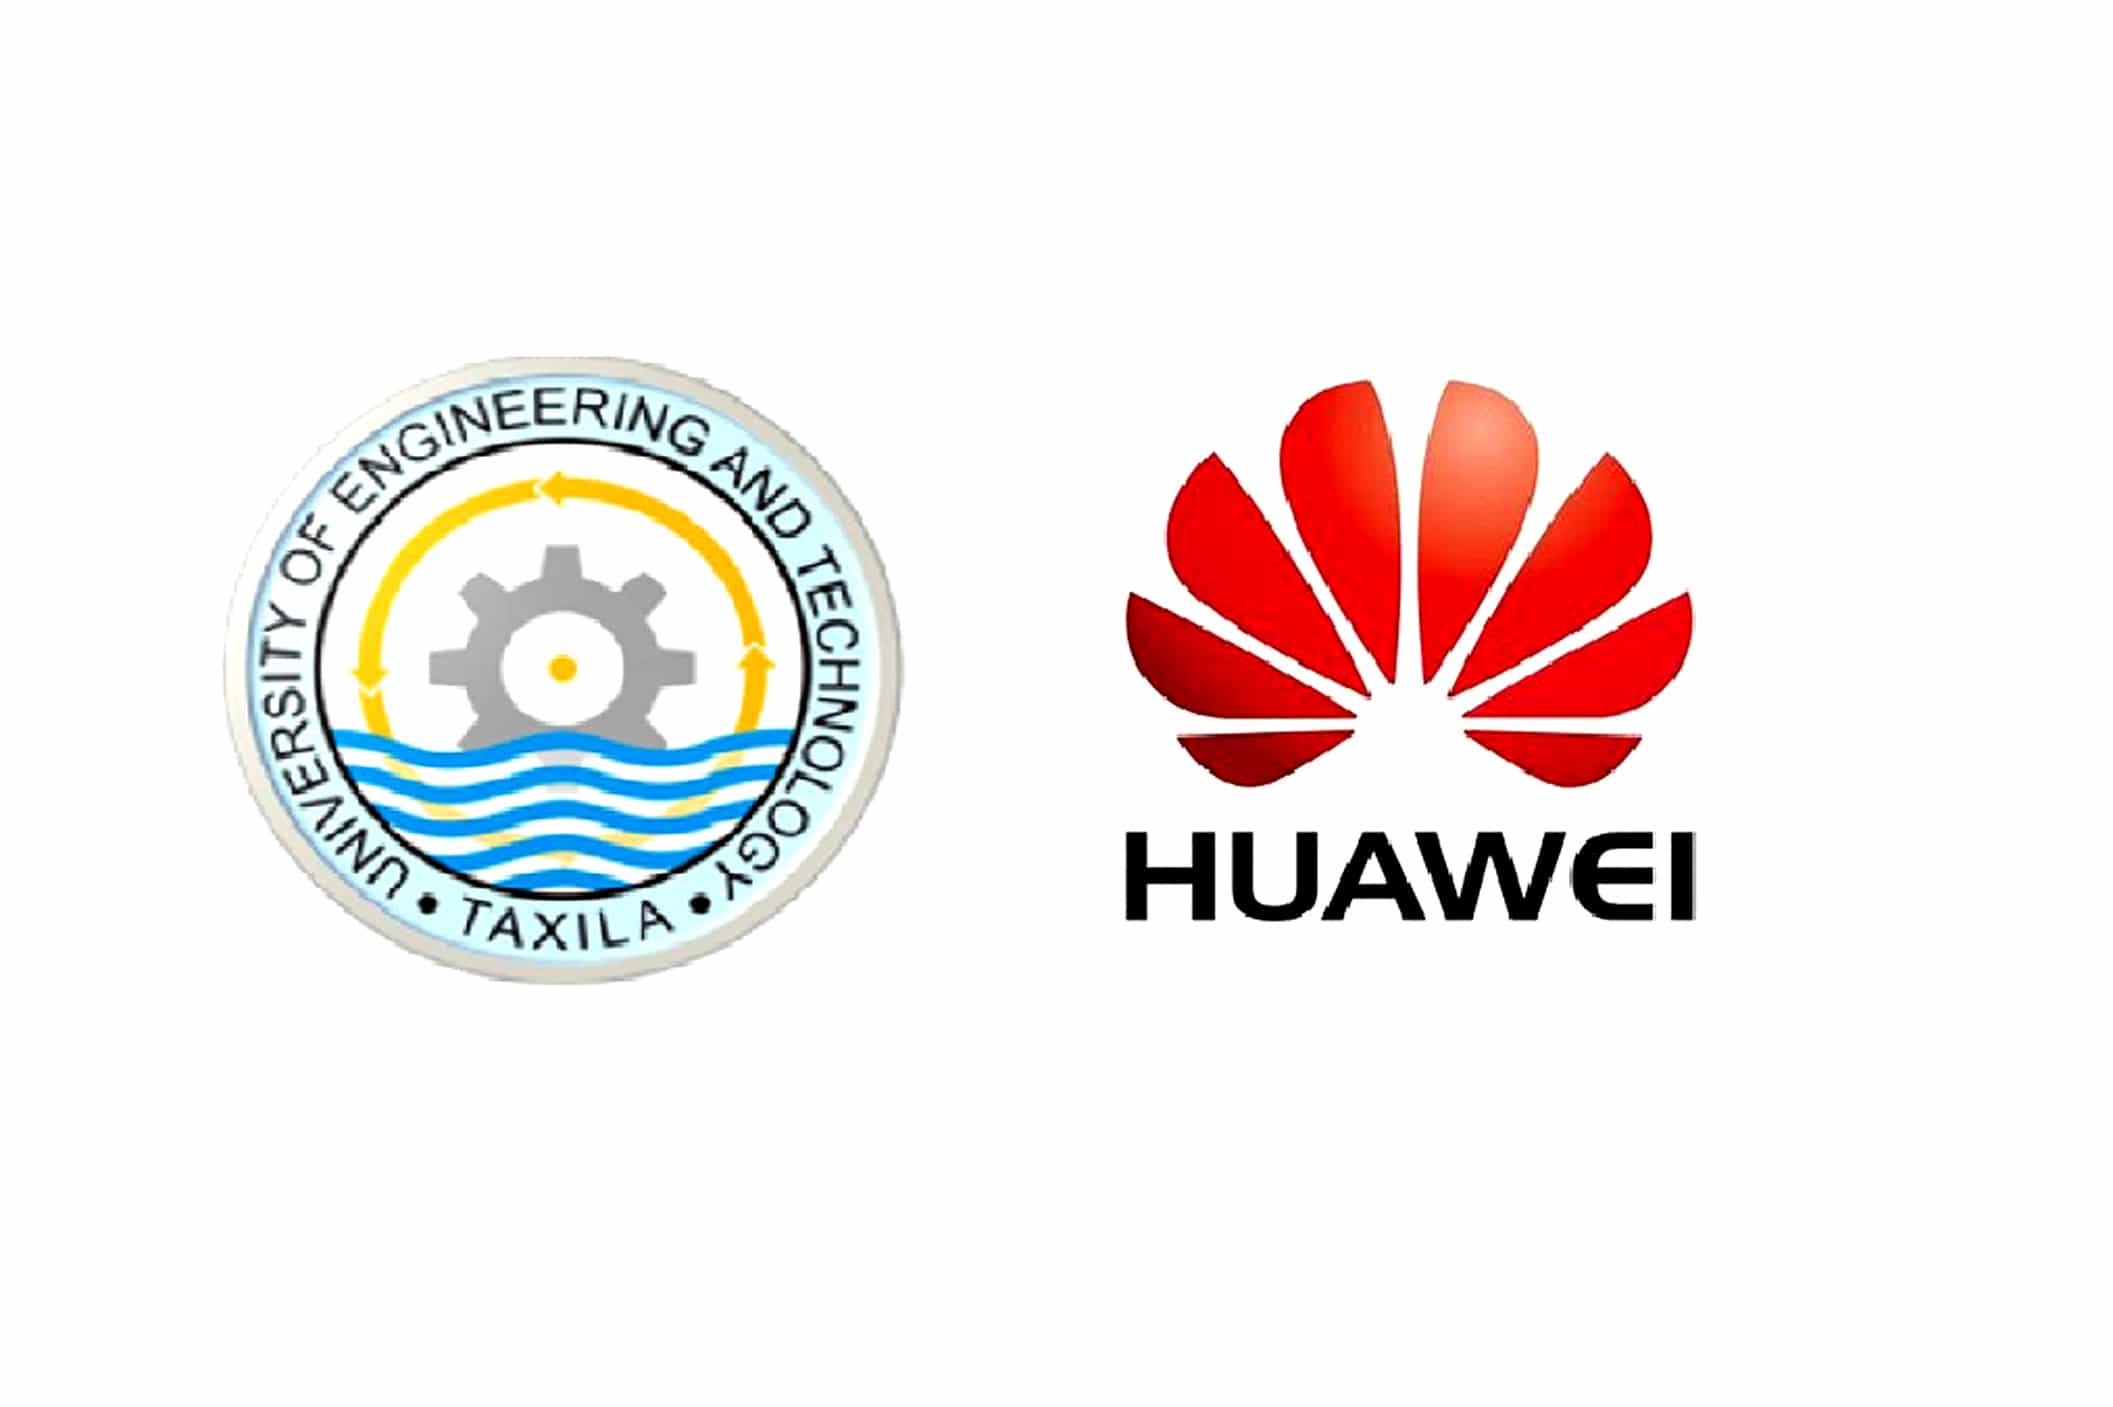 UET Taxila partnered with Huawei for ICT talent development